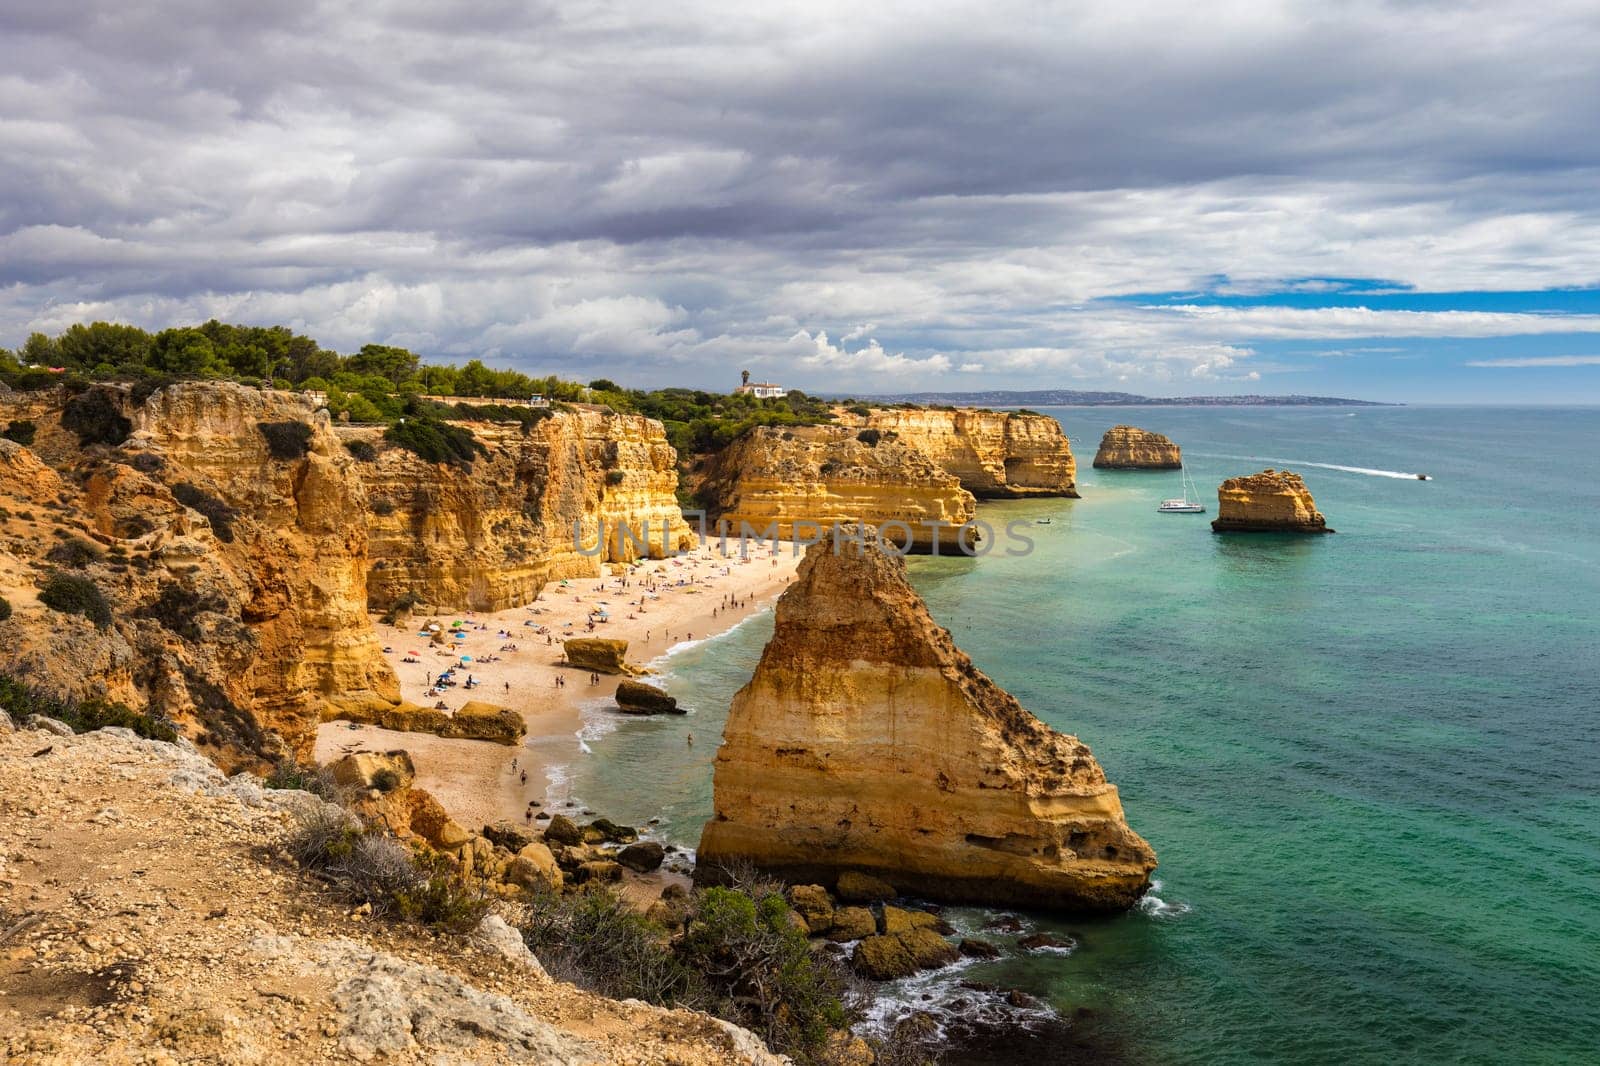 Natural caves at Marinha beach, Algarve Portugal. Rock cliff arches on Marinha beach and turquoise sea water on coast of Portugal in Algarve region.  by DaLiu